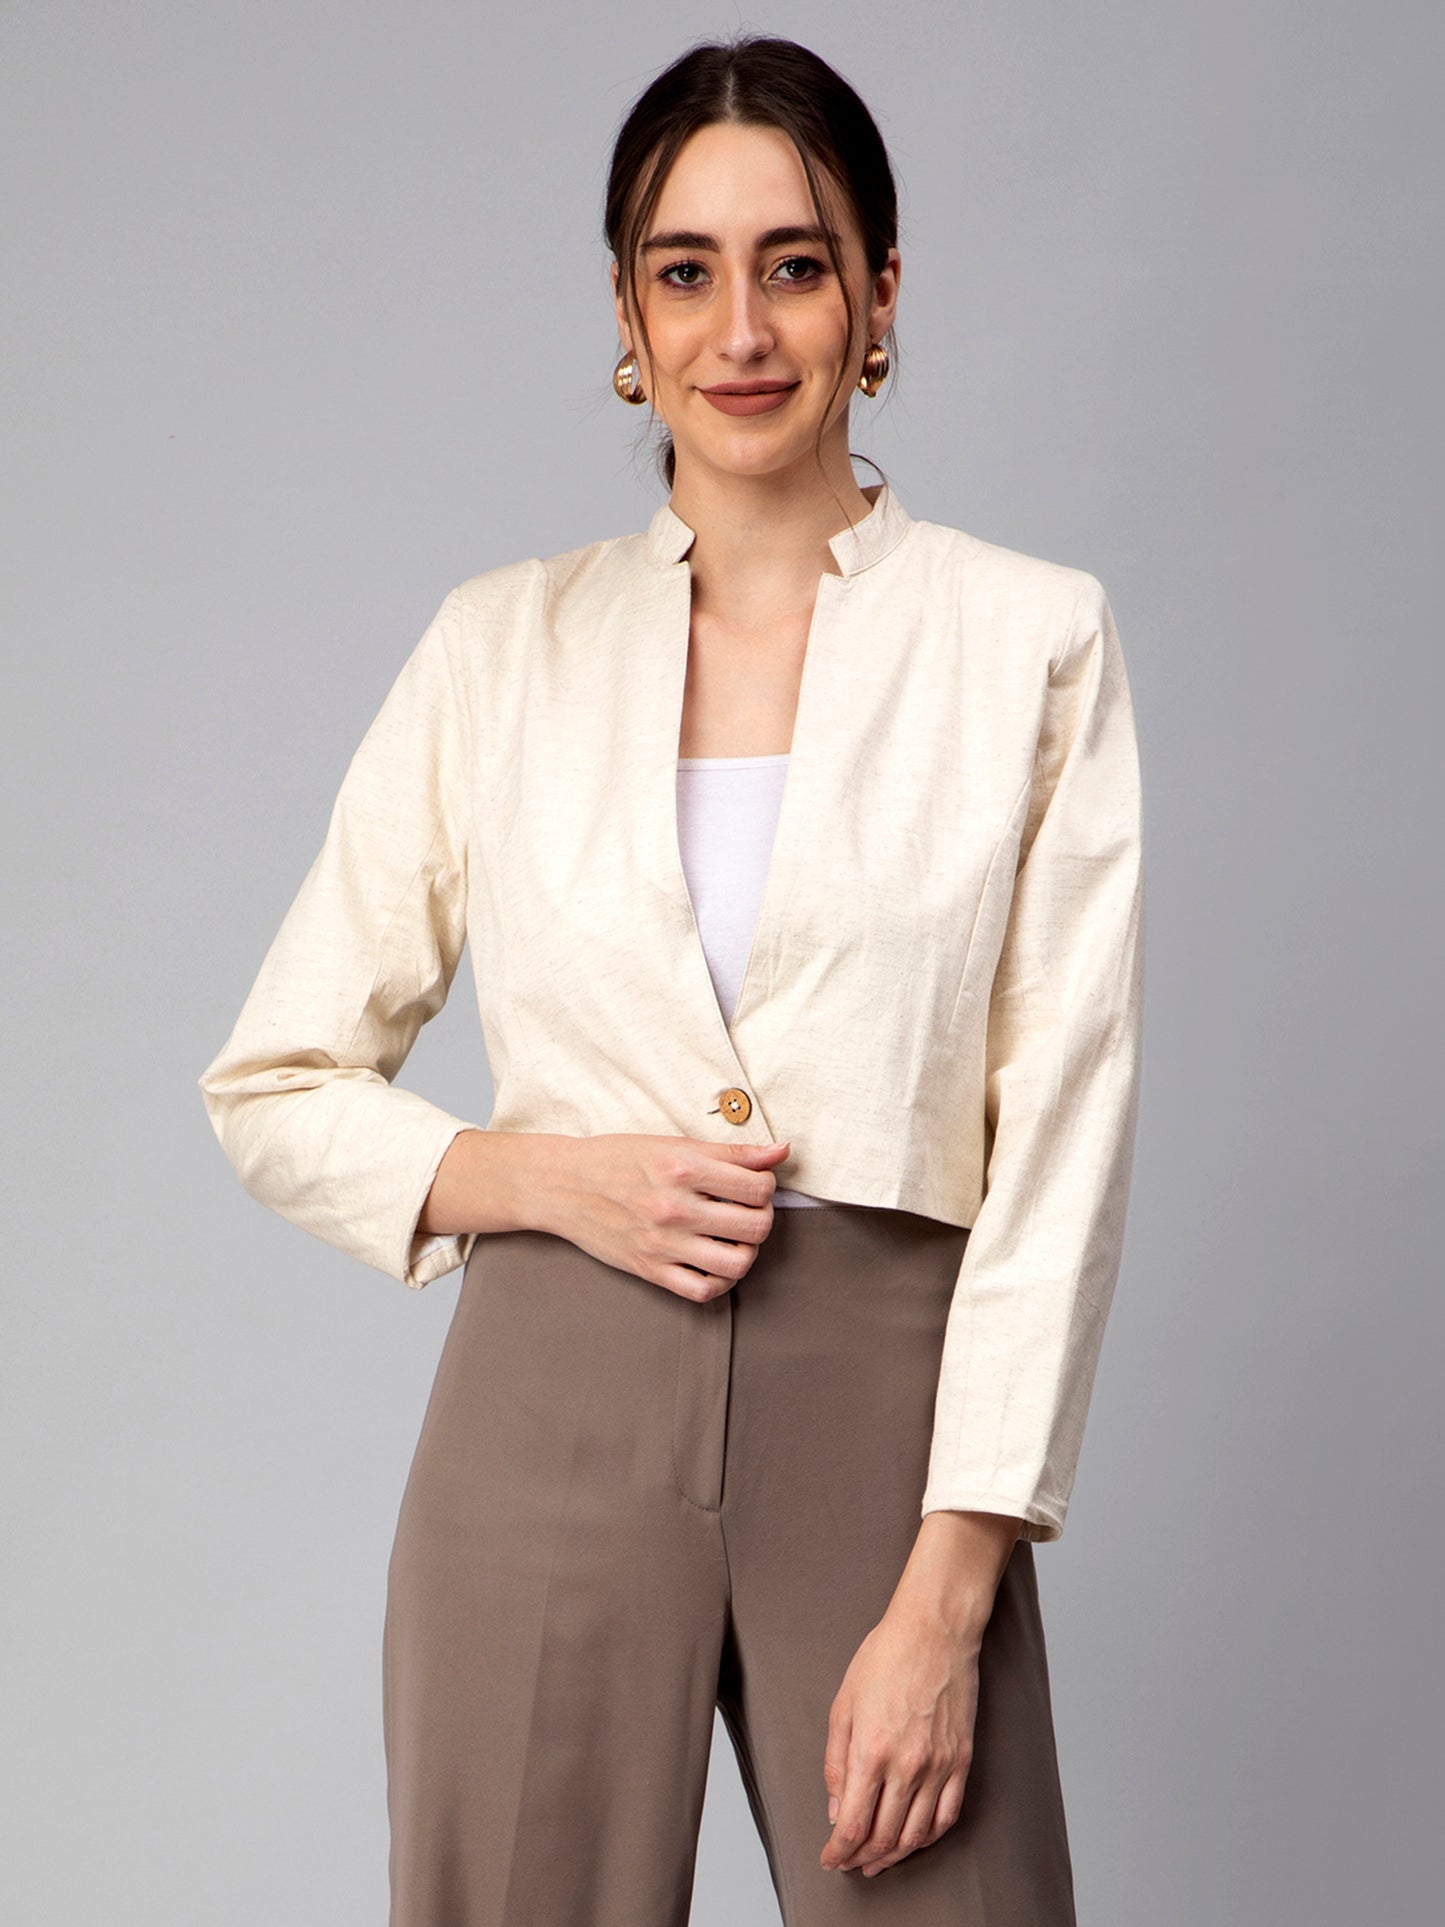 A lady in Beige Blazer In Pure Cotton, womens workwear standing against a tan background 